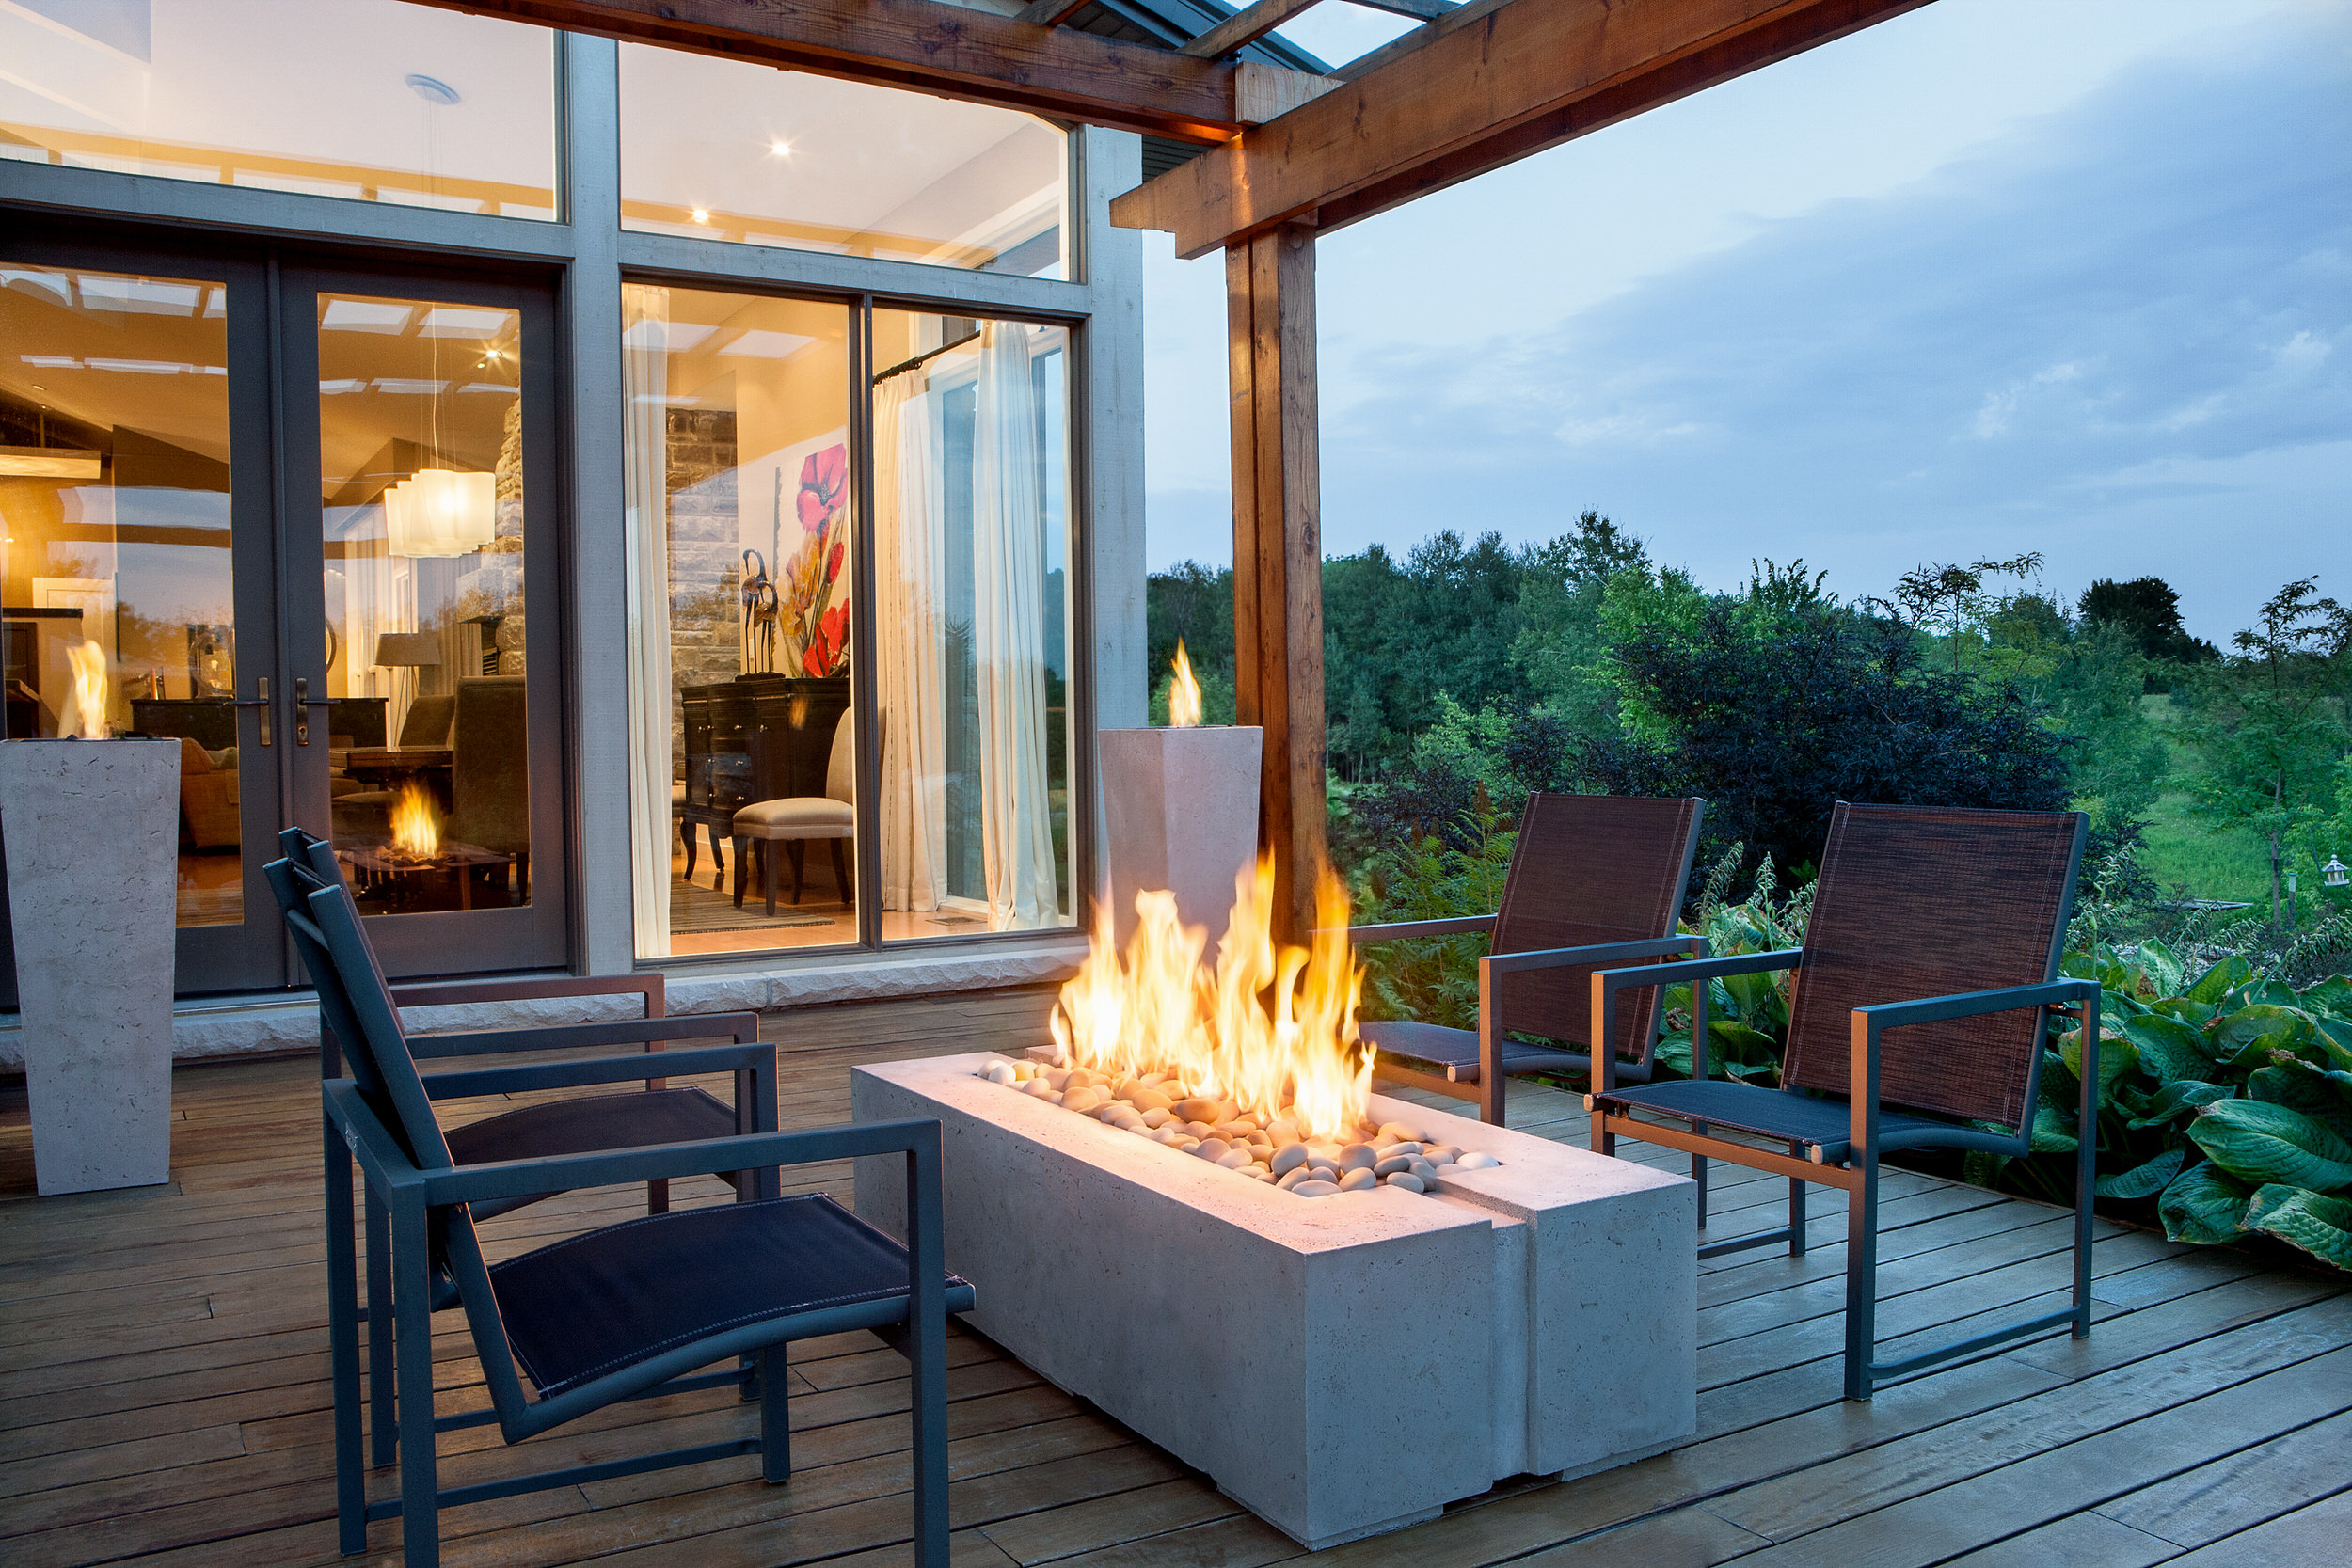 Four outdoor chairs around a rectangular, lit Dekko fire pit from the Avera collection on wooden decking.